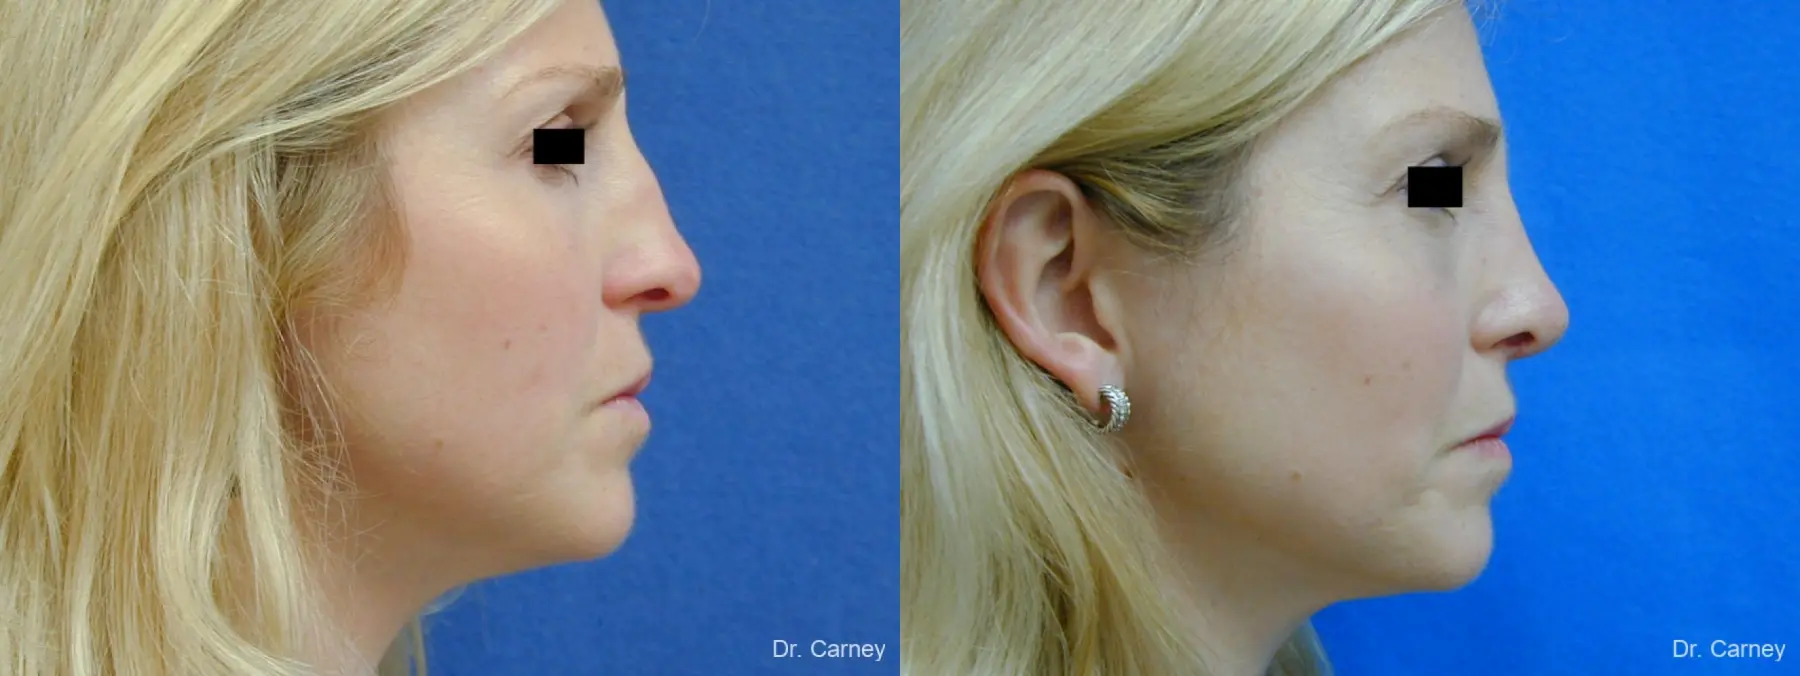 Virginia Beach Rhinoplasty 1343 - Before and After 4